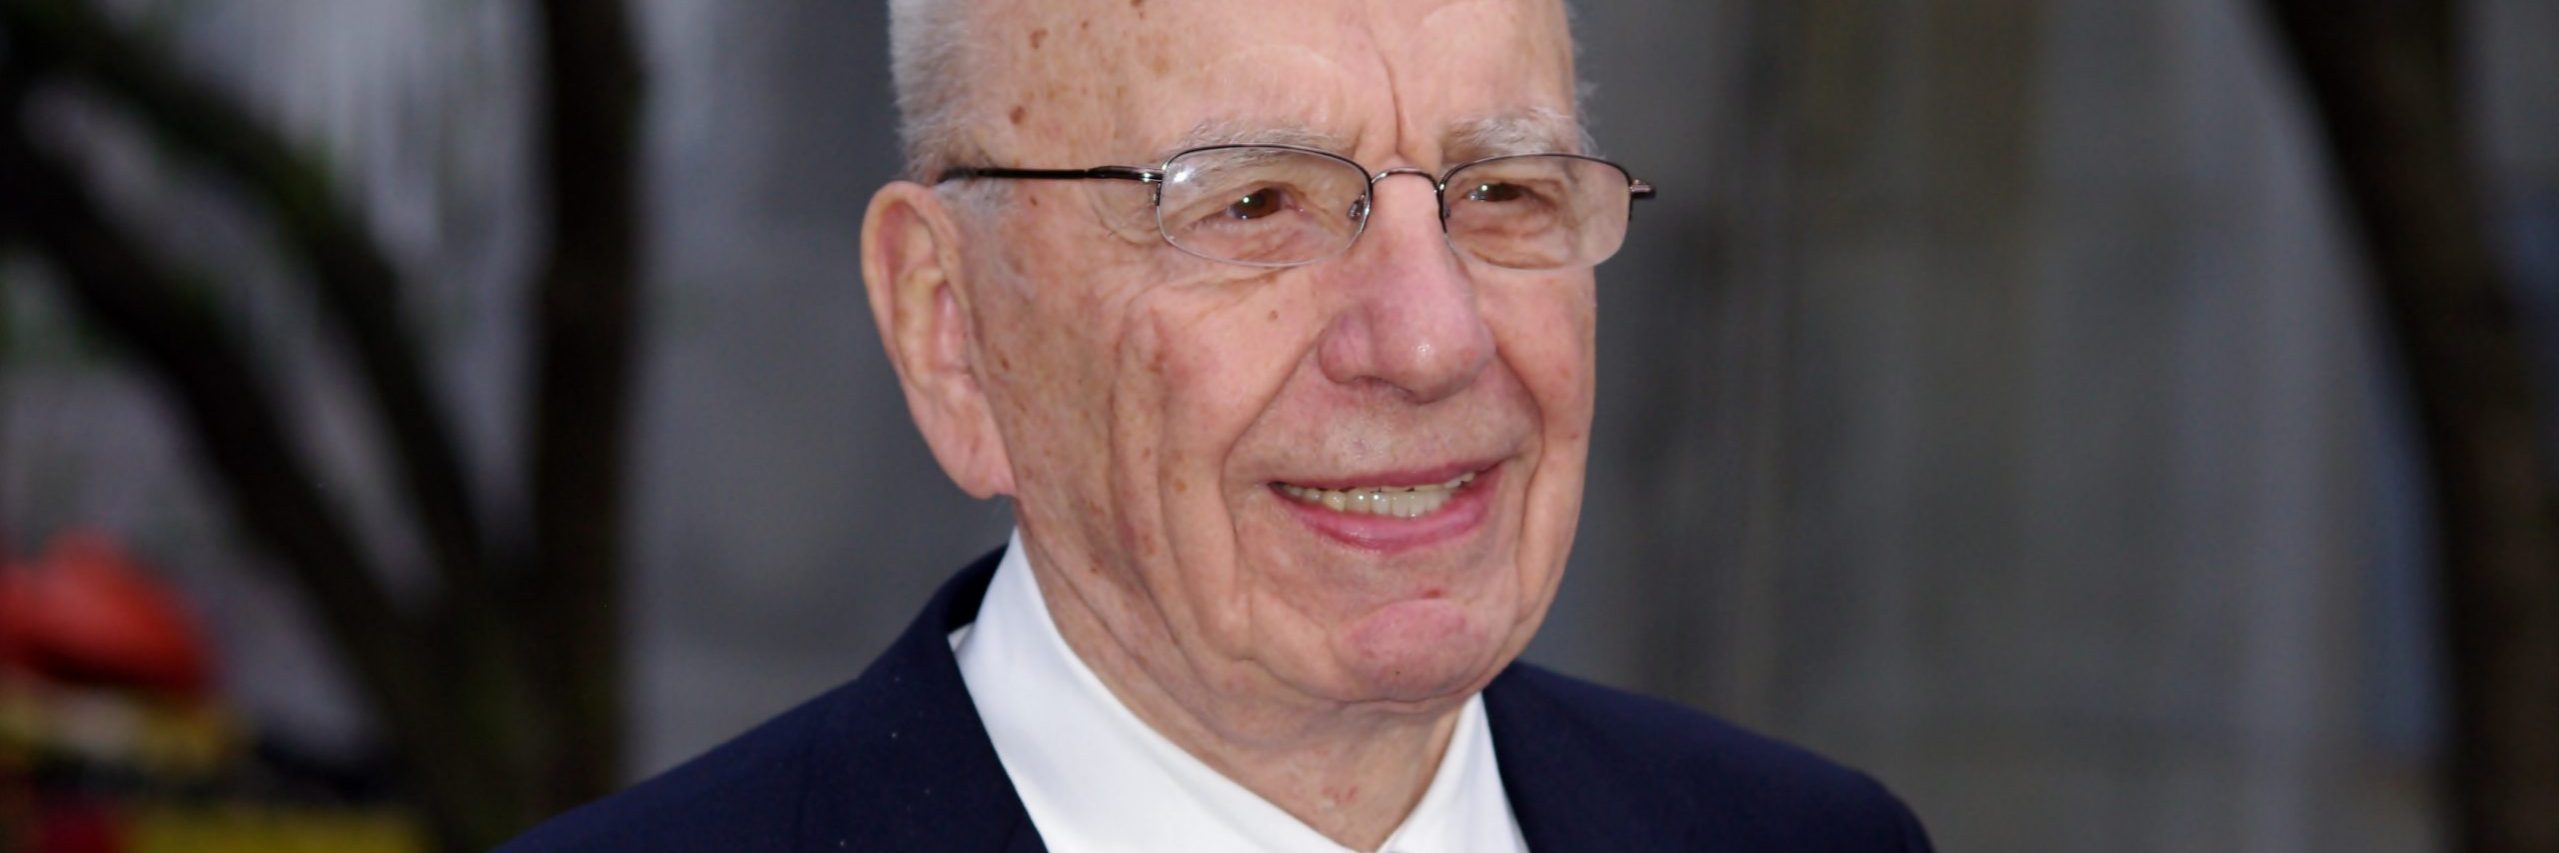 Rupert Murdoch has announced that he is stepping down as the head of Fox Corporation and News Corp.